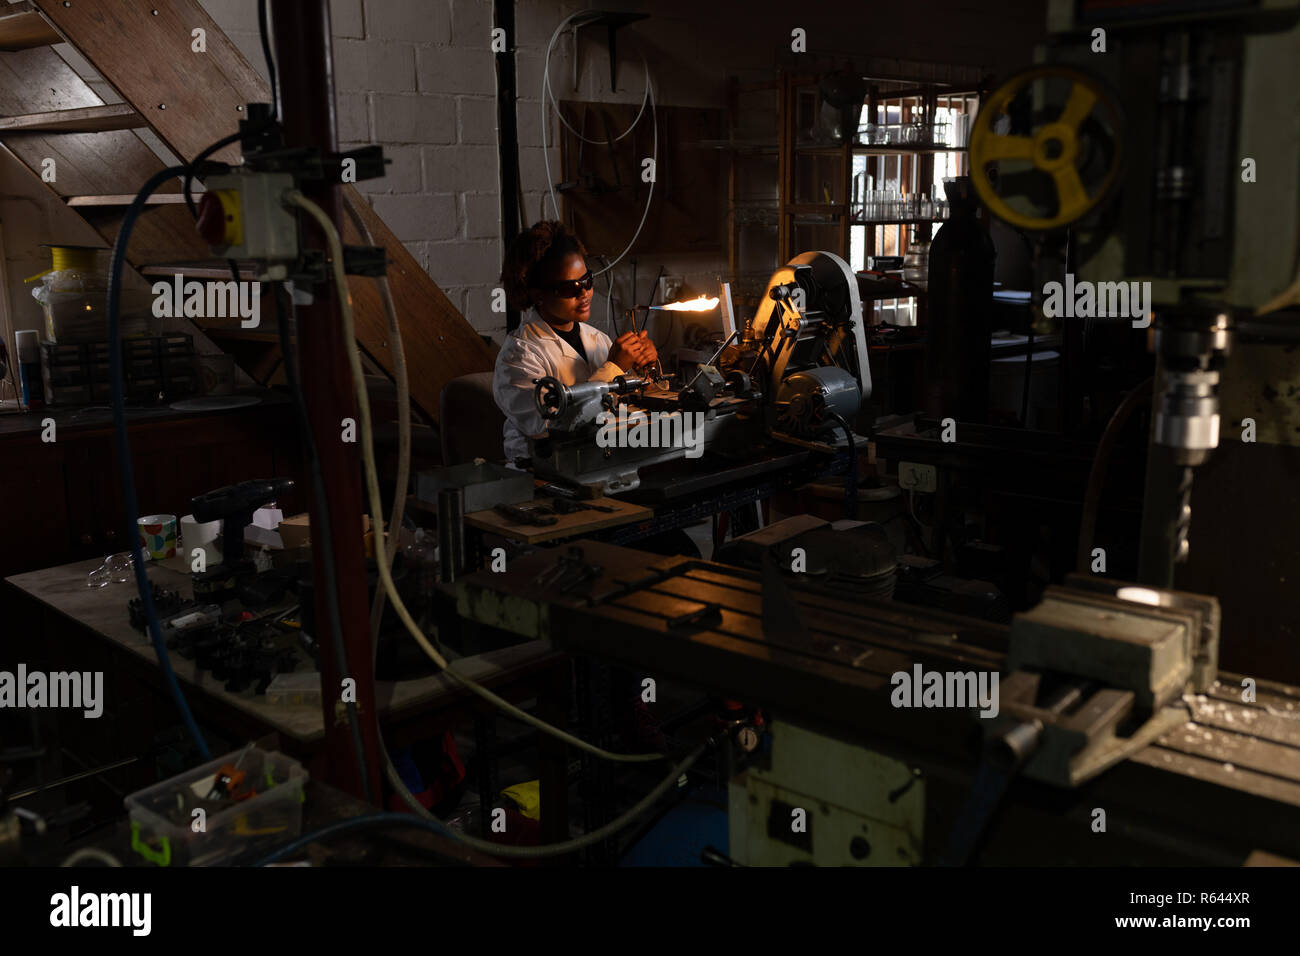 Worker using welding torch in glass factory Stock Photo